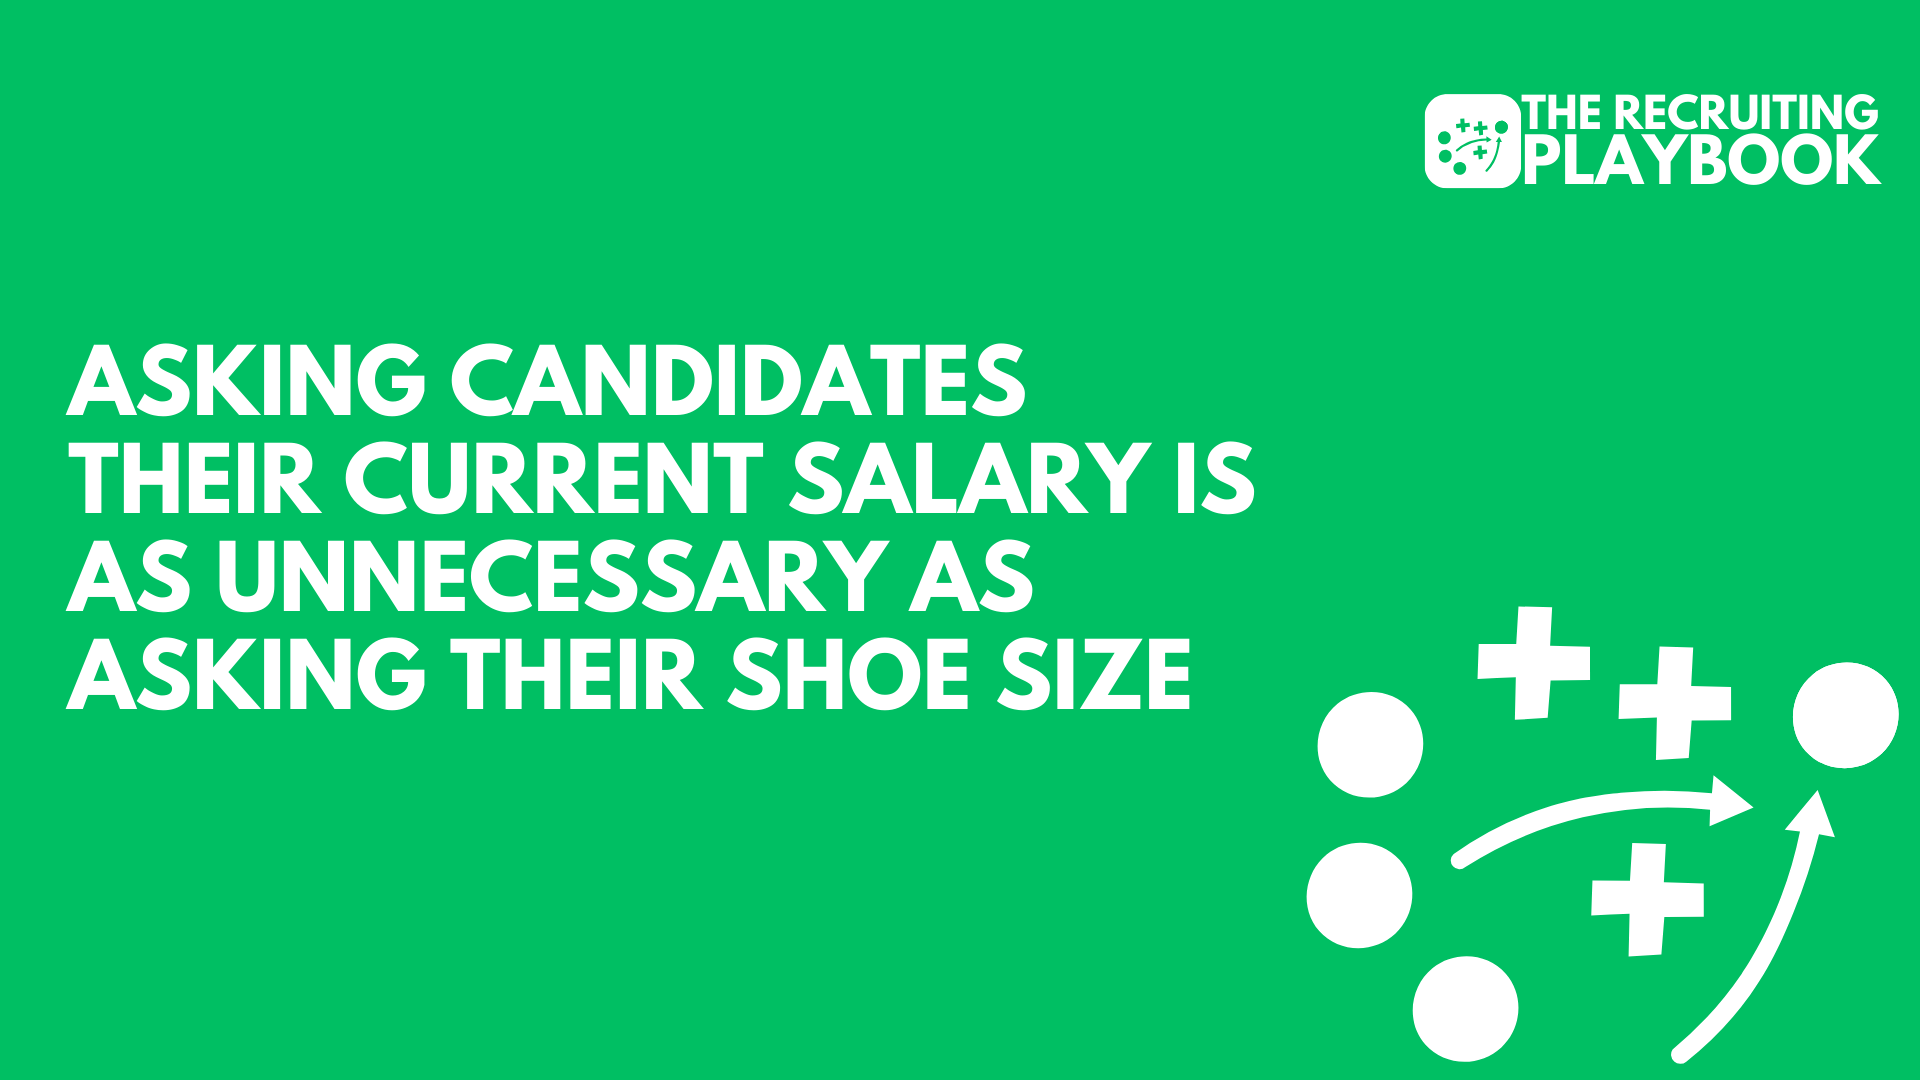 Asking Candidates Their Current Salary Is As Unnecessary As Asking Their Shoe Size